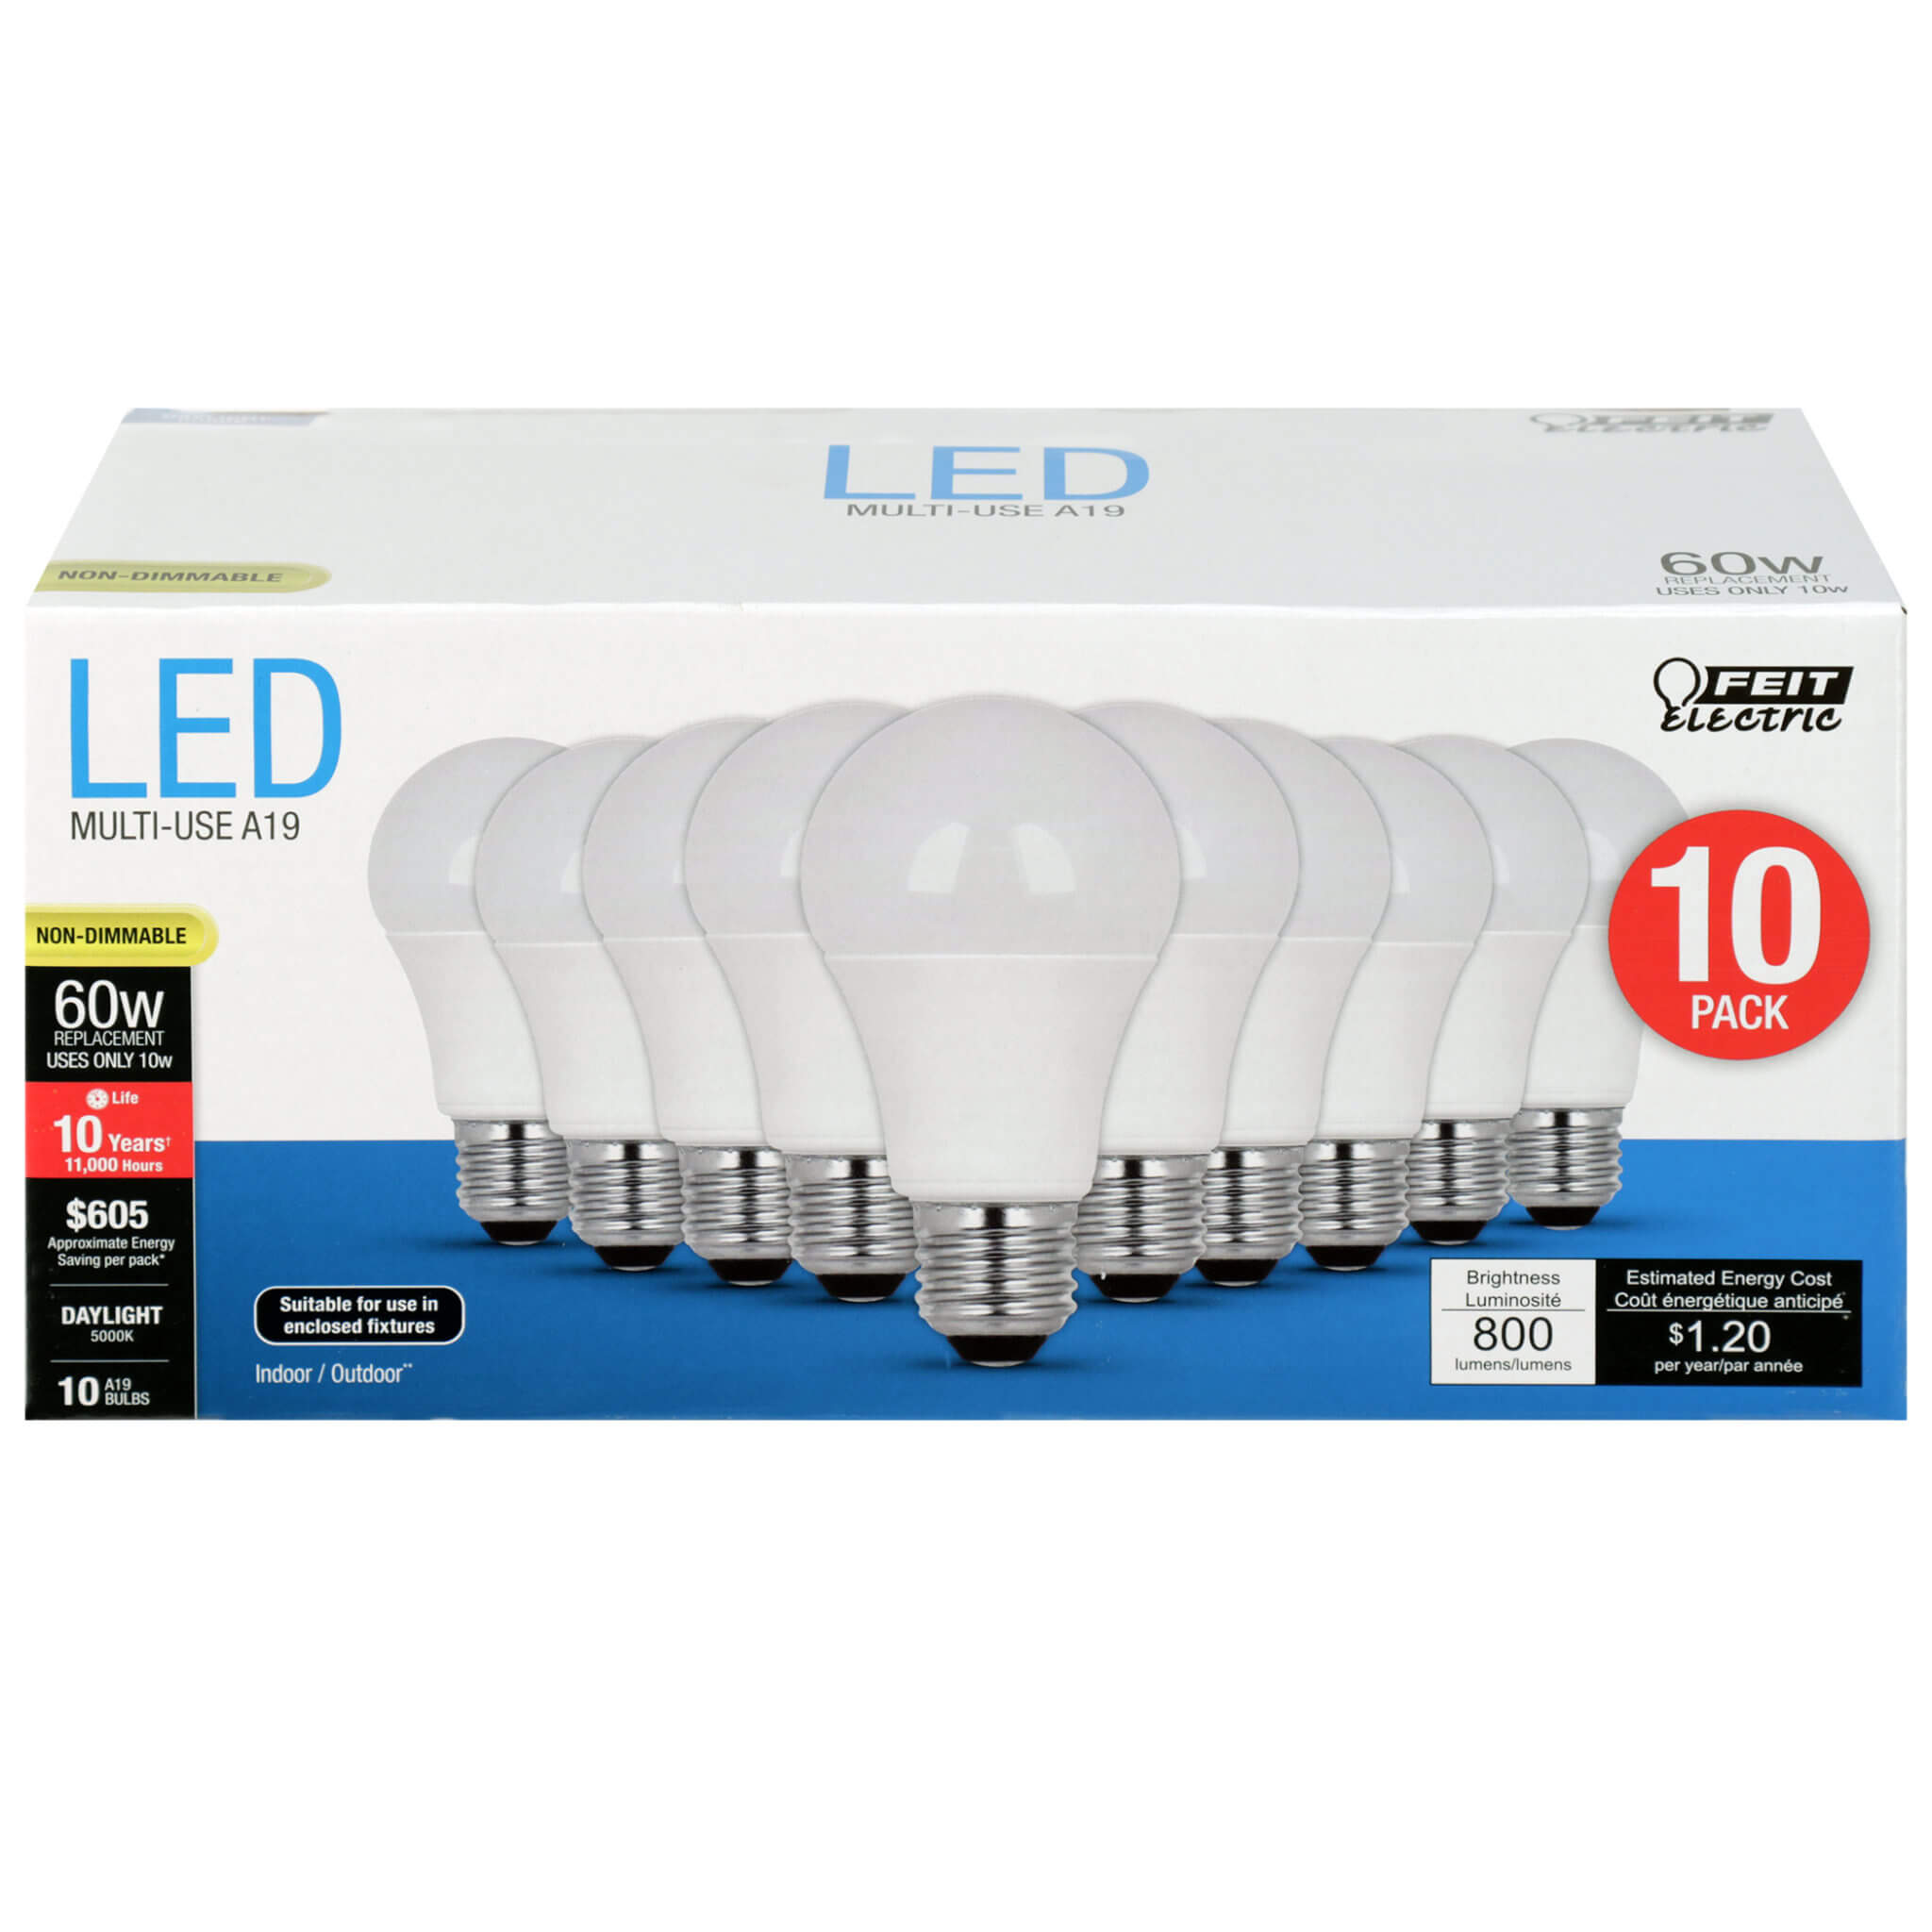 Feit Electric A800/850/10KLED/10 LED Bulb, General Purpose, A19 Lamp, 60 W Equivalent, E26 Lamp Base, Daylight Light